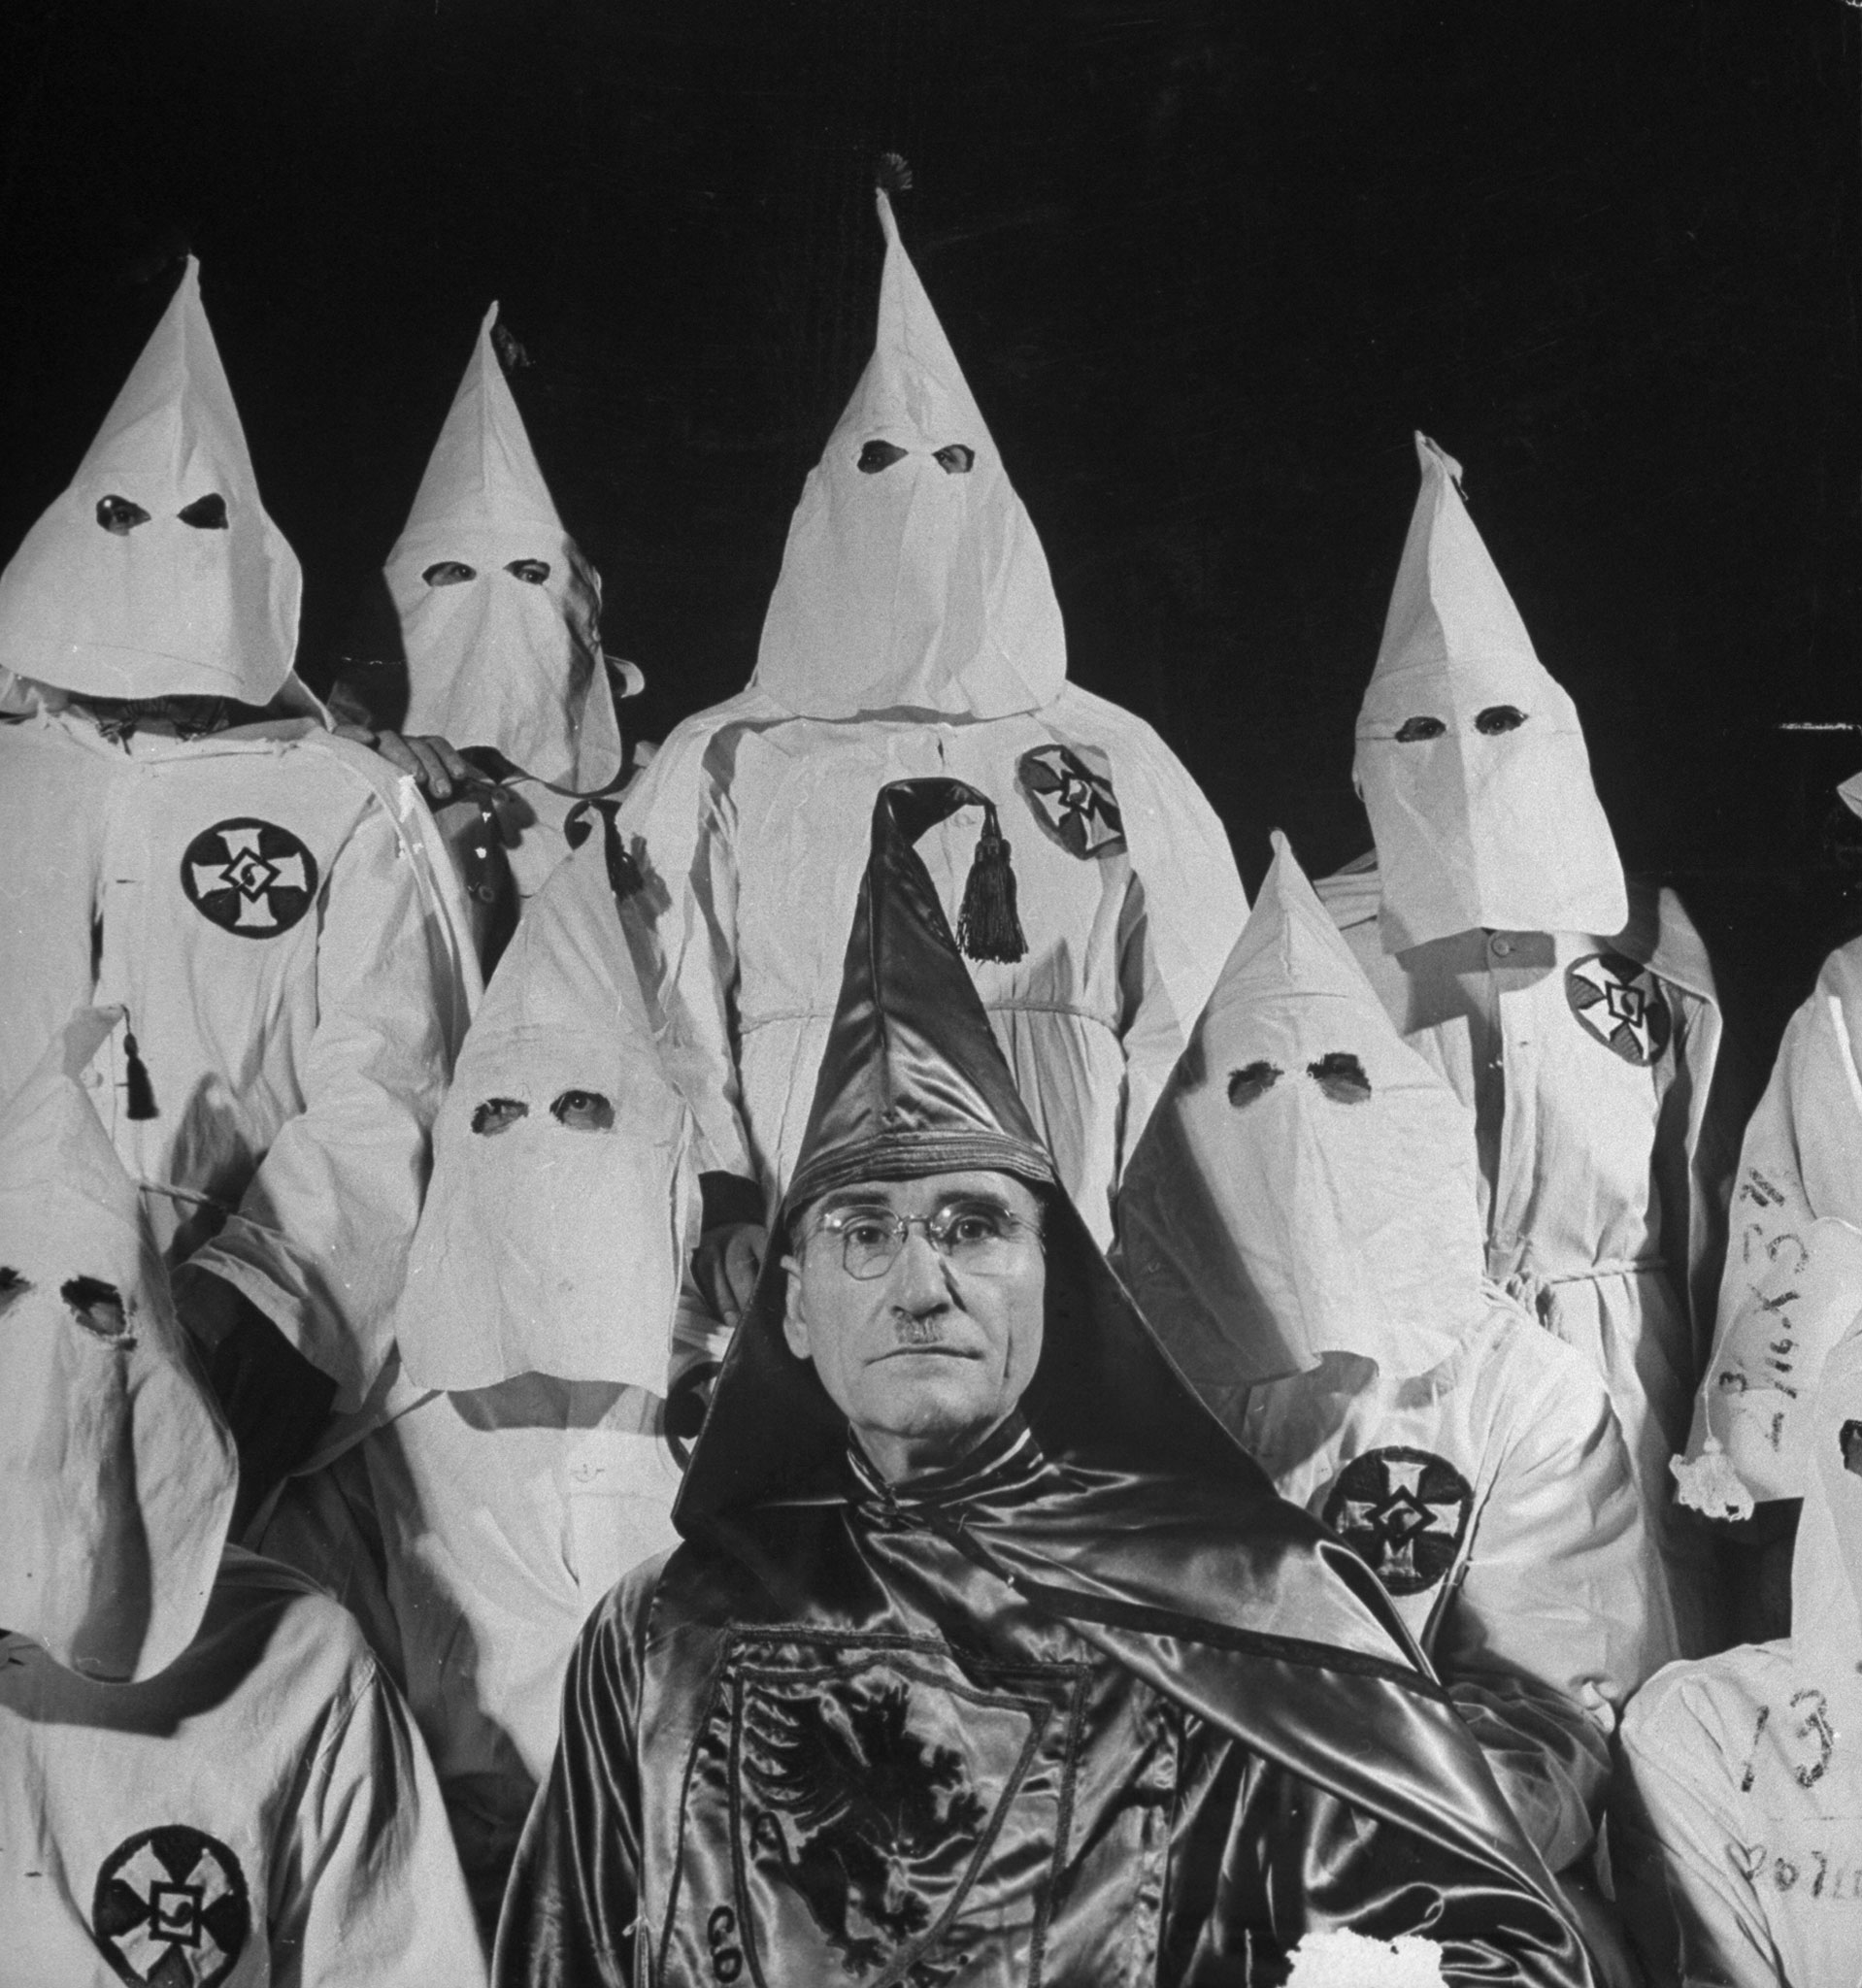 The Grand Dragon of the Fulton County, Ga., Ku Klux Klan, an Atlanta doctor named Samuel Green, surrounded by his assistants, May 1946.